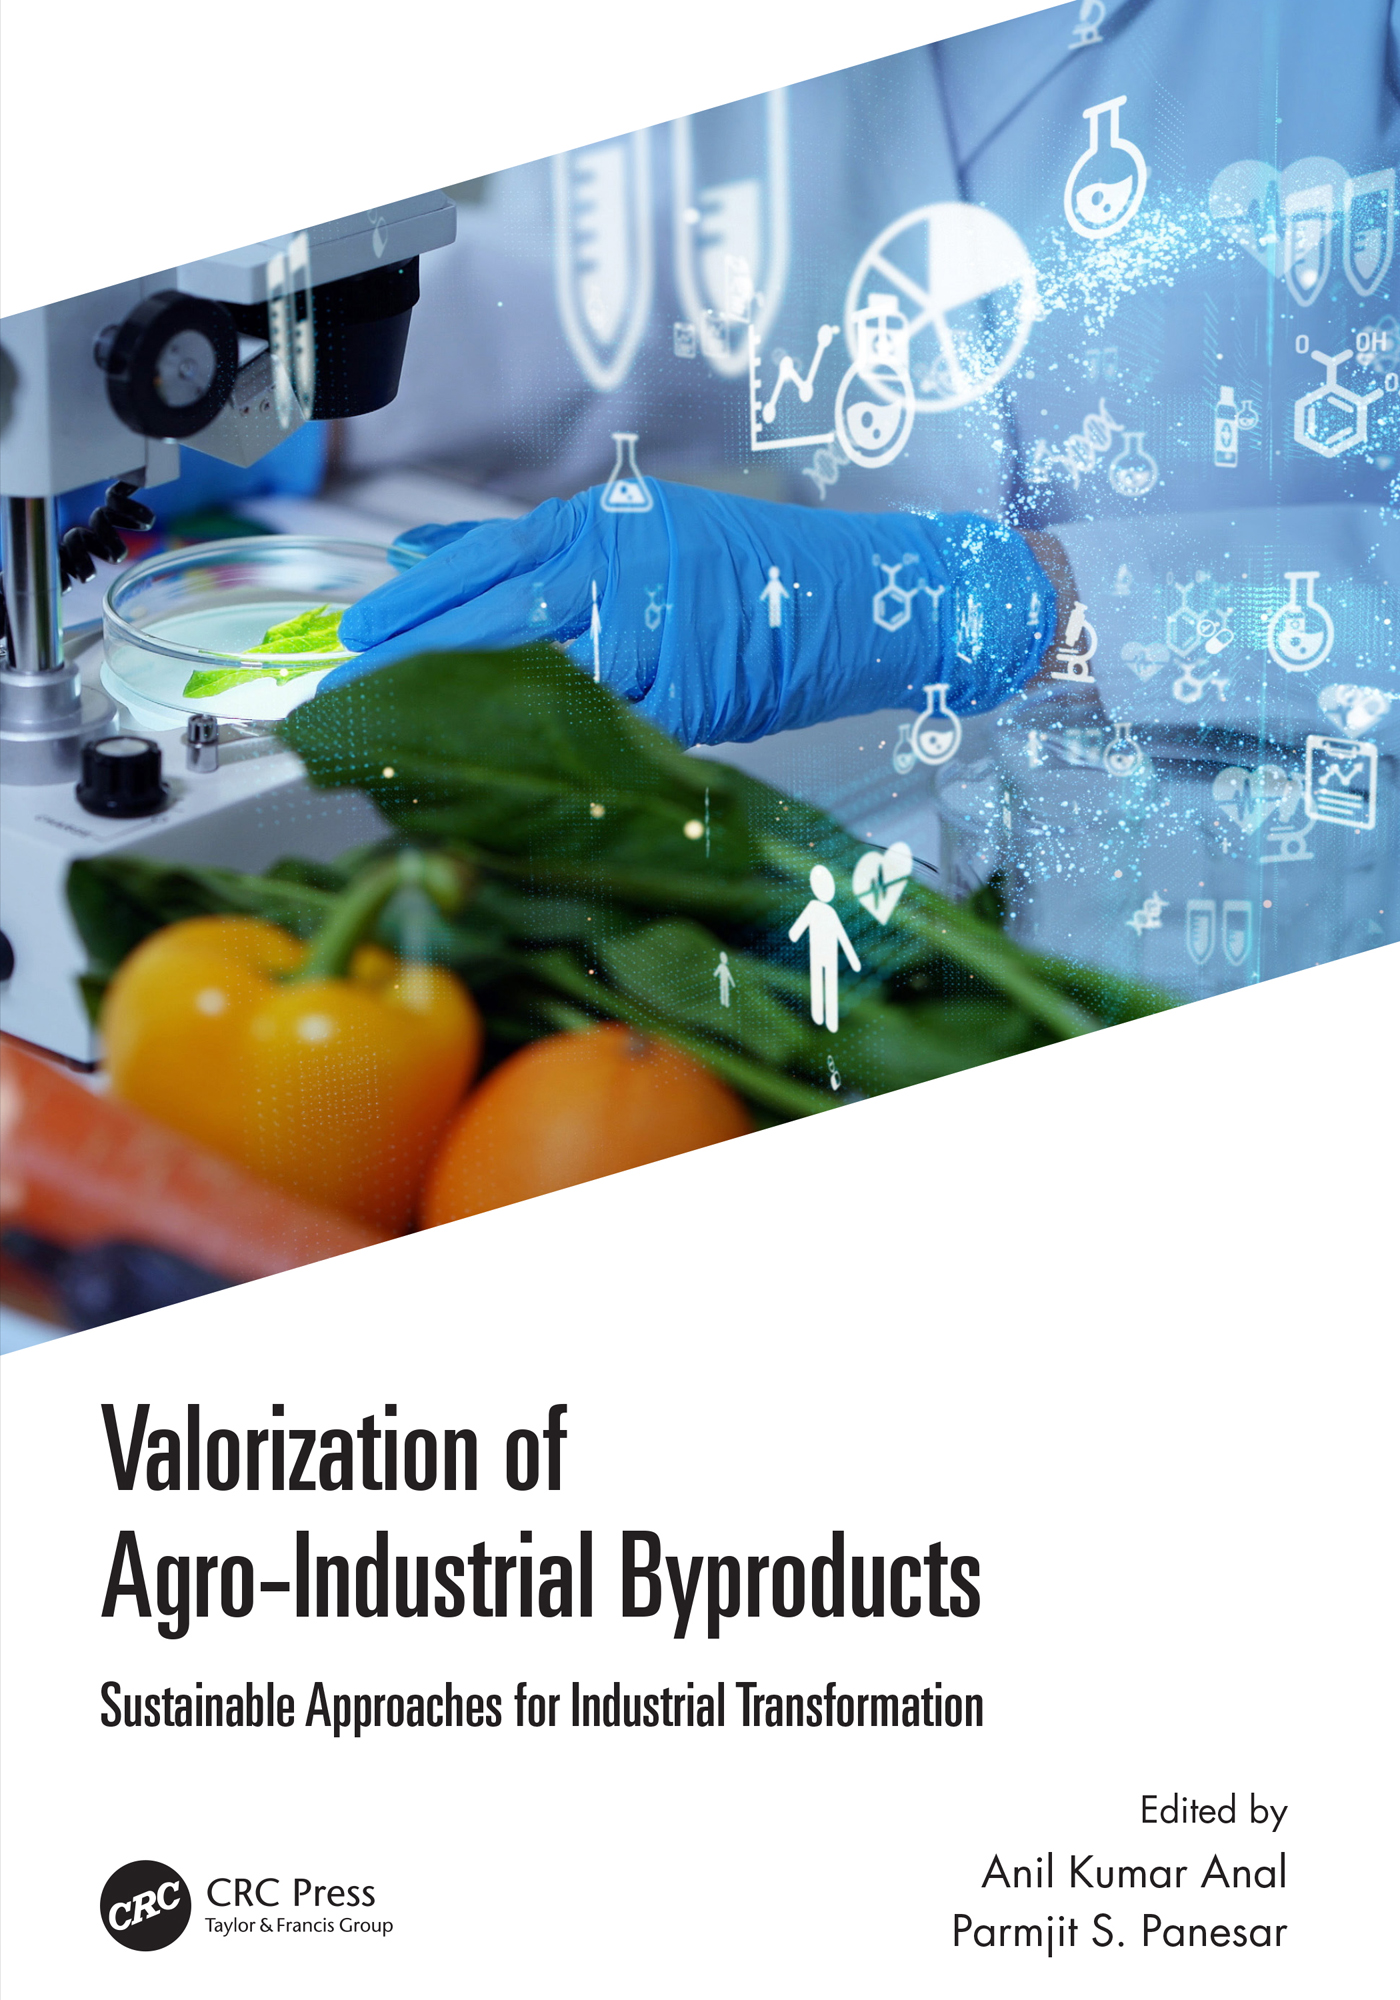 Valorization of Agro-Industrial Byproducts